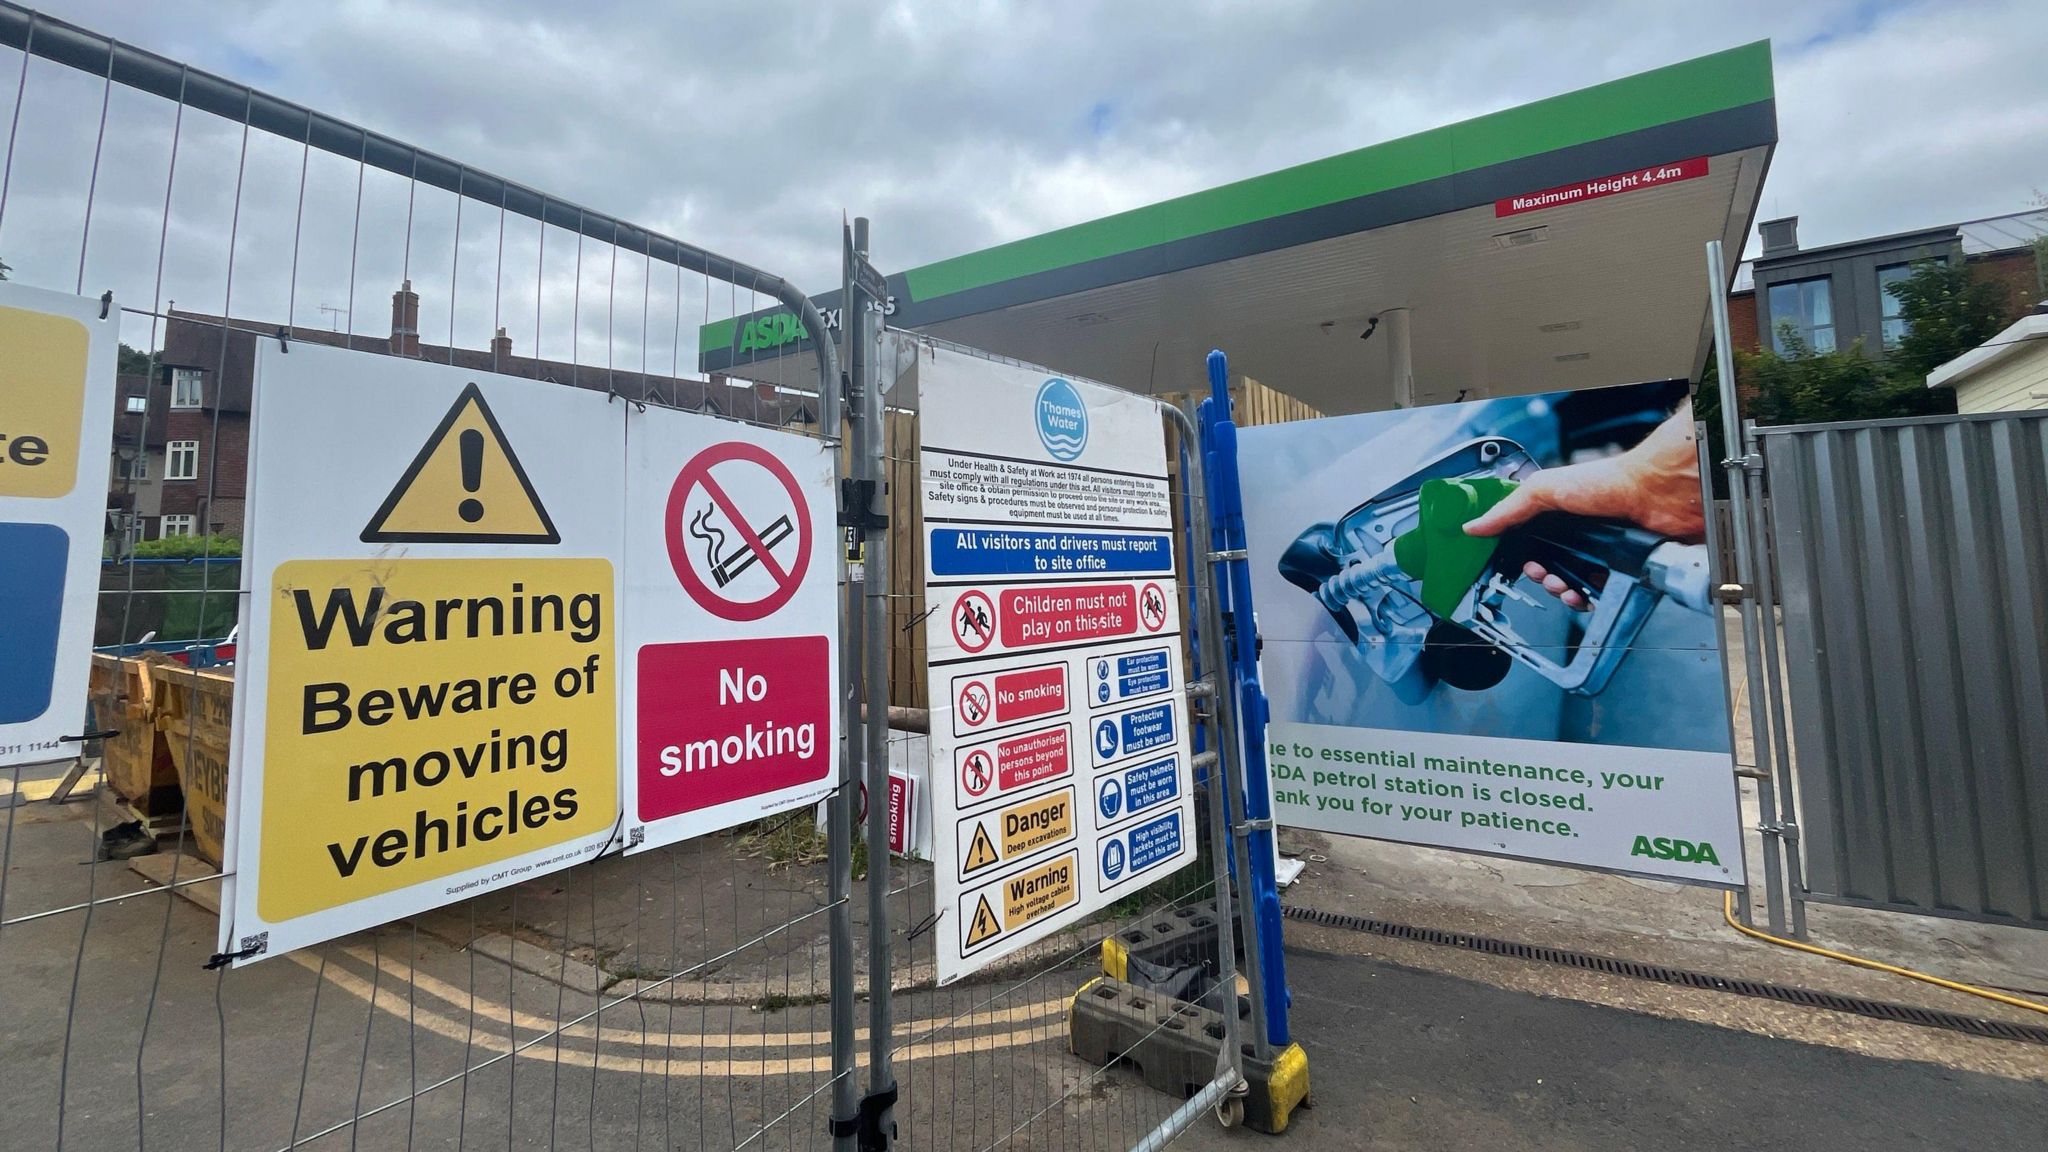 Signs outside a petrol station on fencing